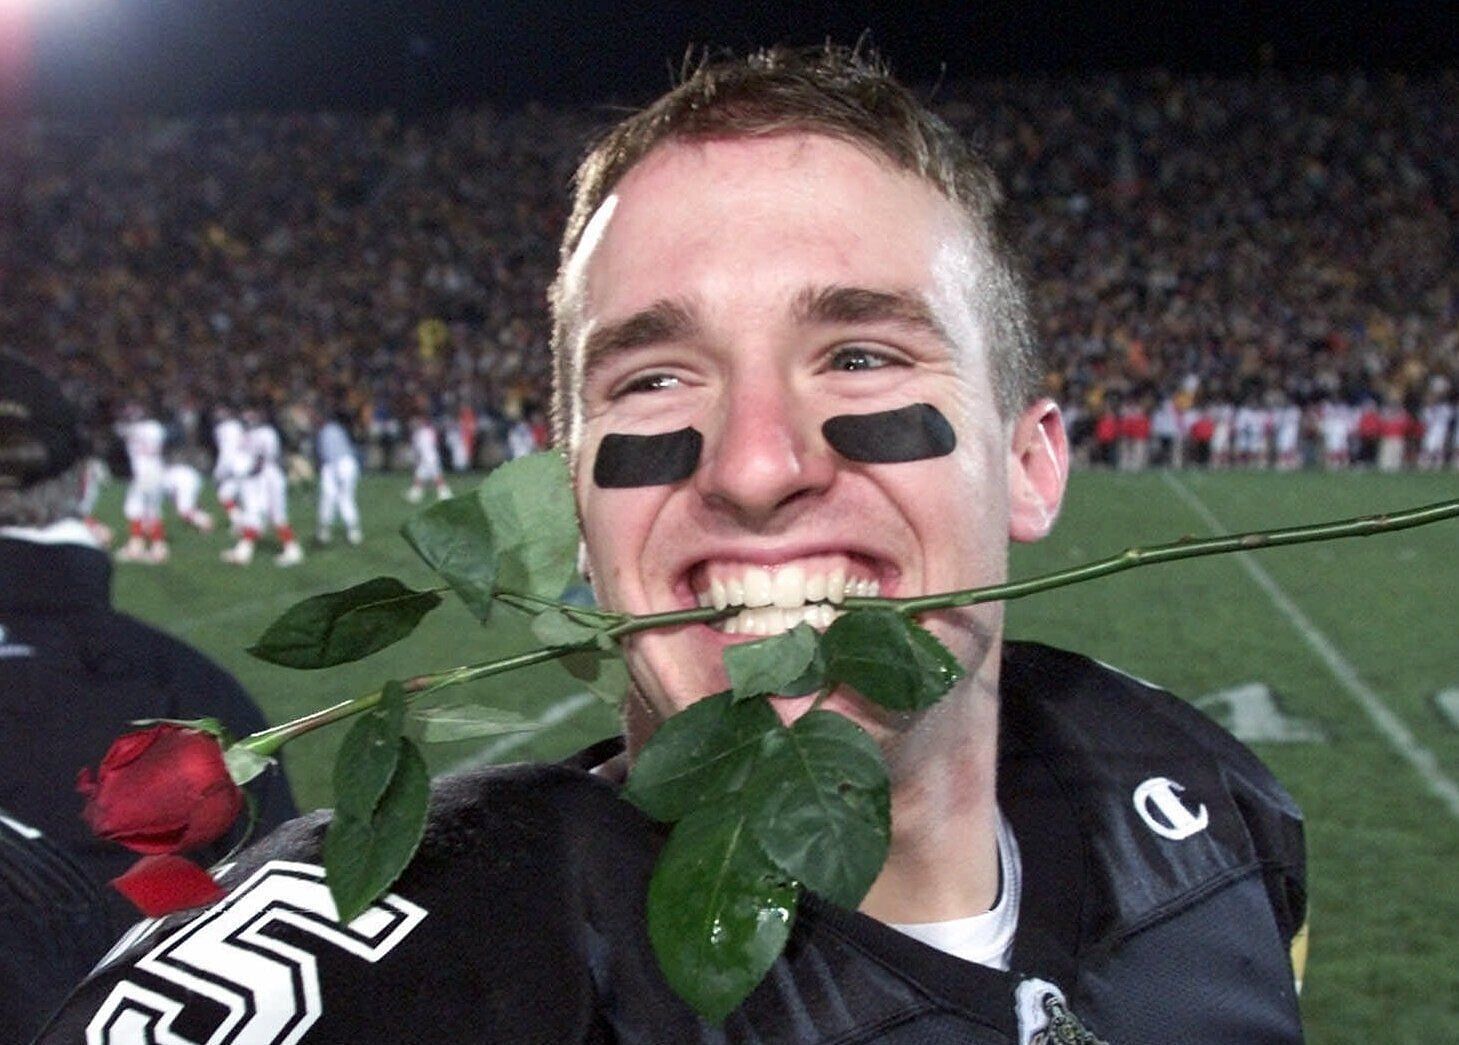 Drew Brees played at Purdue before his NFL career.